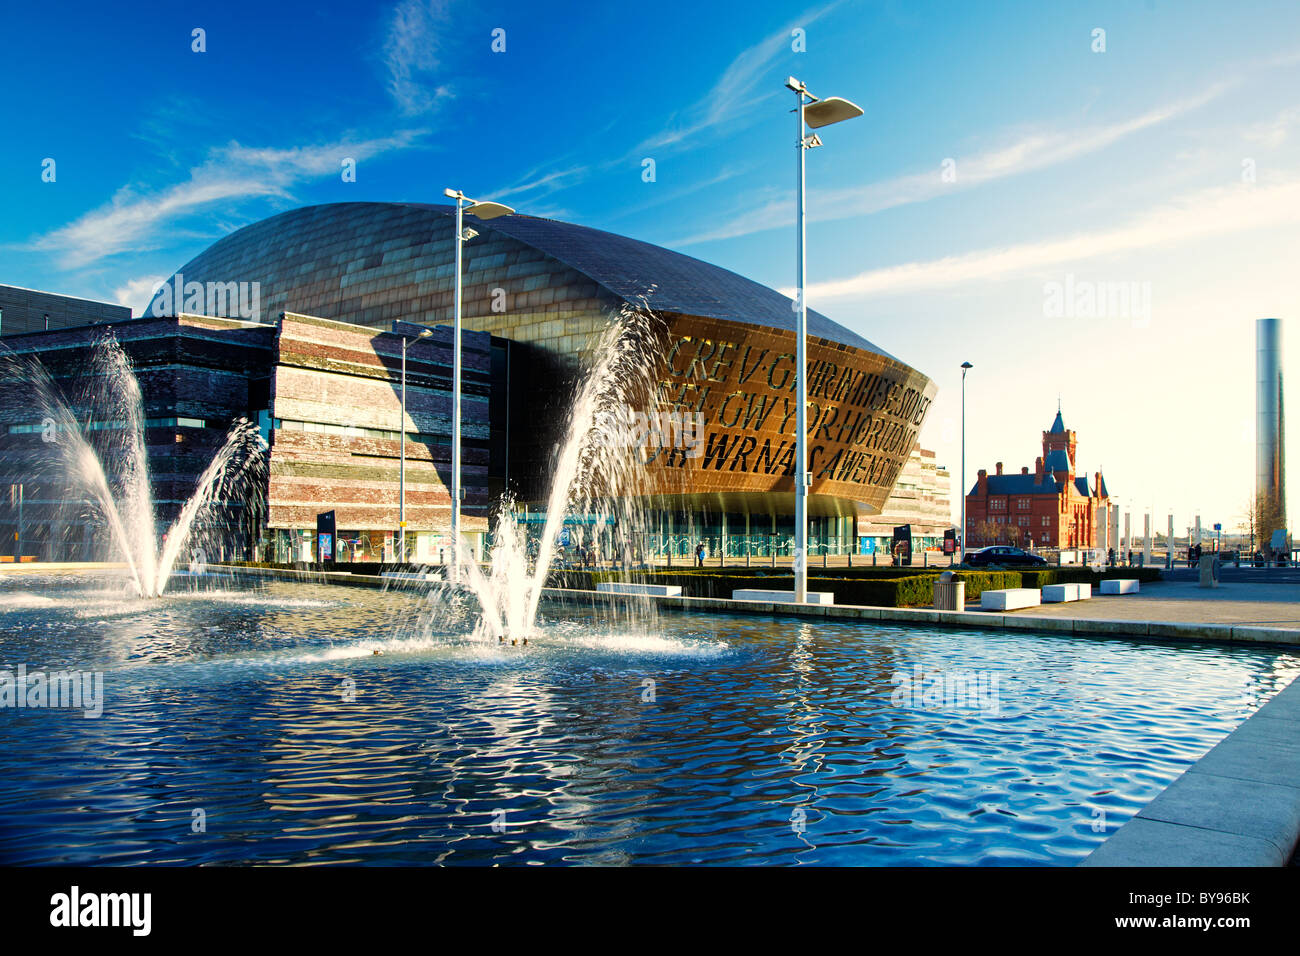 Wales Millennium Centre, Cardiff Bay. Wales, UK Stock Photo